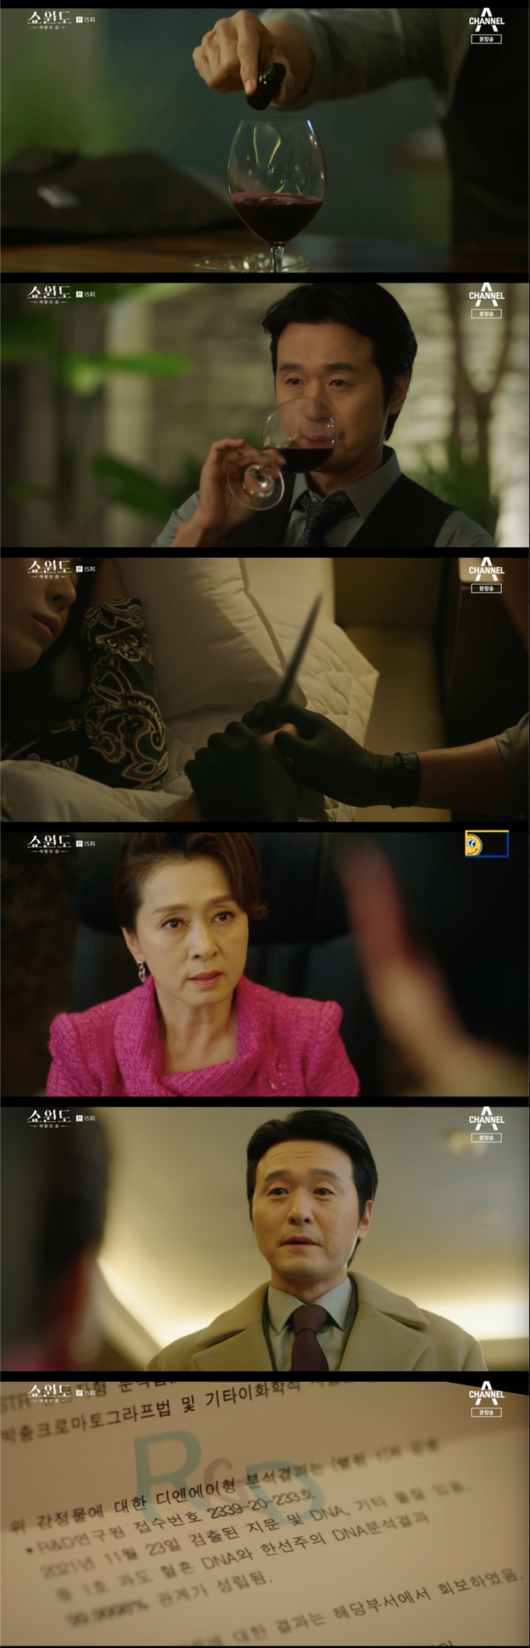 Showwindow: The Queens House Song Yoon-ah gave Lee Sung-jae his last greeting.In the drama Showwindo: The Queens House (playplayplay by Han Bo-kyung, Park Hye-young / Directed by Kangsol, Park Dae-hee), which was broadcasted at 10:30 p.m. on the 17th, Shin Myung-seop (Lee Sung-jae), who is on the spot as chairman of Rahen, got on the air.Shin Myung-seop told prosecutor Ando Hyuk (Kim Young-joon) and JS Jewelry CEO Lee Jun-sang (Kim Jung-tae) that I will be in the position of chairman of Rahen Group.Shin Myeong-seop suggested to Han Seon-joo, Lets have a glass of wine. Han Seon-ju, who did not know this fact, drank wine saying, Now everything will come back to its place?Han Seon-ju, who drank all the wine, fell asleep deep and Shin Myung-seop buried Han Seon-jus fingerprints on the knife that stabbed Yoon Mi-ra.Kim Kang-im said to Shin Myung-sup, It is not cool to change you, Yun Mi-ra, who touched my poor son and made me bruise my precious daughters heart.I do not fit your fountain, but I will take one arrear with alimony. So Shin Myung-seop said, Eat an aperal and fall away? I can not do that. He said, Do you think Rahen is your president? Ill tell you. Rahen is mine.Its not Kim Kang-im, its Shin Myung-seop. Nobody but me can be the owner of Rahen. Shin Myung-seop showed Kim Kang-im a picture of a bloody weapon. He said, Yoon Mi-ra is the ship owner.Shin Myung-seop, who does not believe this, said, The fingerprints on the knife of the crime tool are consistent with the Han Sun-ju. Shin Myung-seop pressed Kim Kang-im, saying, Do you want to submit the knife and documents to the police?I will keep the ship owner, but please give me Rahen instead, he said.Kim Kang-im, who was shocked, called Han Sun-ju and cried, Is not it you? He handed me a picture of the knife and an appraisal that Shin Myung-seop gave him.He said it was evidence that you were the one who stabbed him. He brought this evidence and told me to hand over Rahen. Han Seon-ju, who learned all the facts, said, Please do what Shin Myung-seop wants, and that will eventually be the way to save Rahen.After all, Shin became chairman. Han Seon-ju told Shin Myung-sup, I finally dreamed. Its wonderful. I wanted to see you sit down.Shin Myung-seop, who attended the executive meeting, recalled the criticism and shame he had received from Kim Kang-im in the past. He laughed and asked executives, Is there any problem with the supply and demand of raw materials in Southeast Asian factories?I am confident that the supply and demand of raw materials, which was raised during the last strike, will not happen again.Lets get some tension. Its not the permanent guarantee of where youre sitting. Remember, if you dont have a performance, you can be relentless.Try hard enough to break your knees and bring out your visible achievements. Do not be proud and try constantly. On the other hand, at the end of the broadcast, Han Seon-ju was attacked by a gangster, raising dramatic tension. In the last scene, Shin Myung-seops picture of Young-jung and the funeral scene spread the question about Shin Myung-seops words.In the preliminary announcement, Han Seon-jus voice Goodbye to the girl was added and added to the theory of Shin Myung-seops death.Channel A Showwindow: Queens House broadcast screen captures